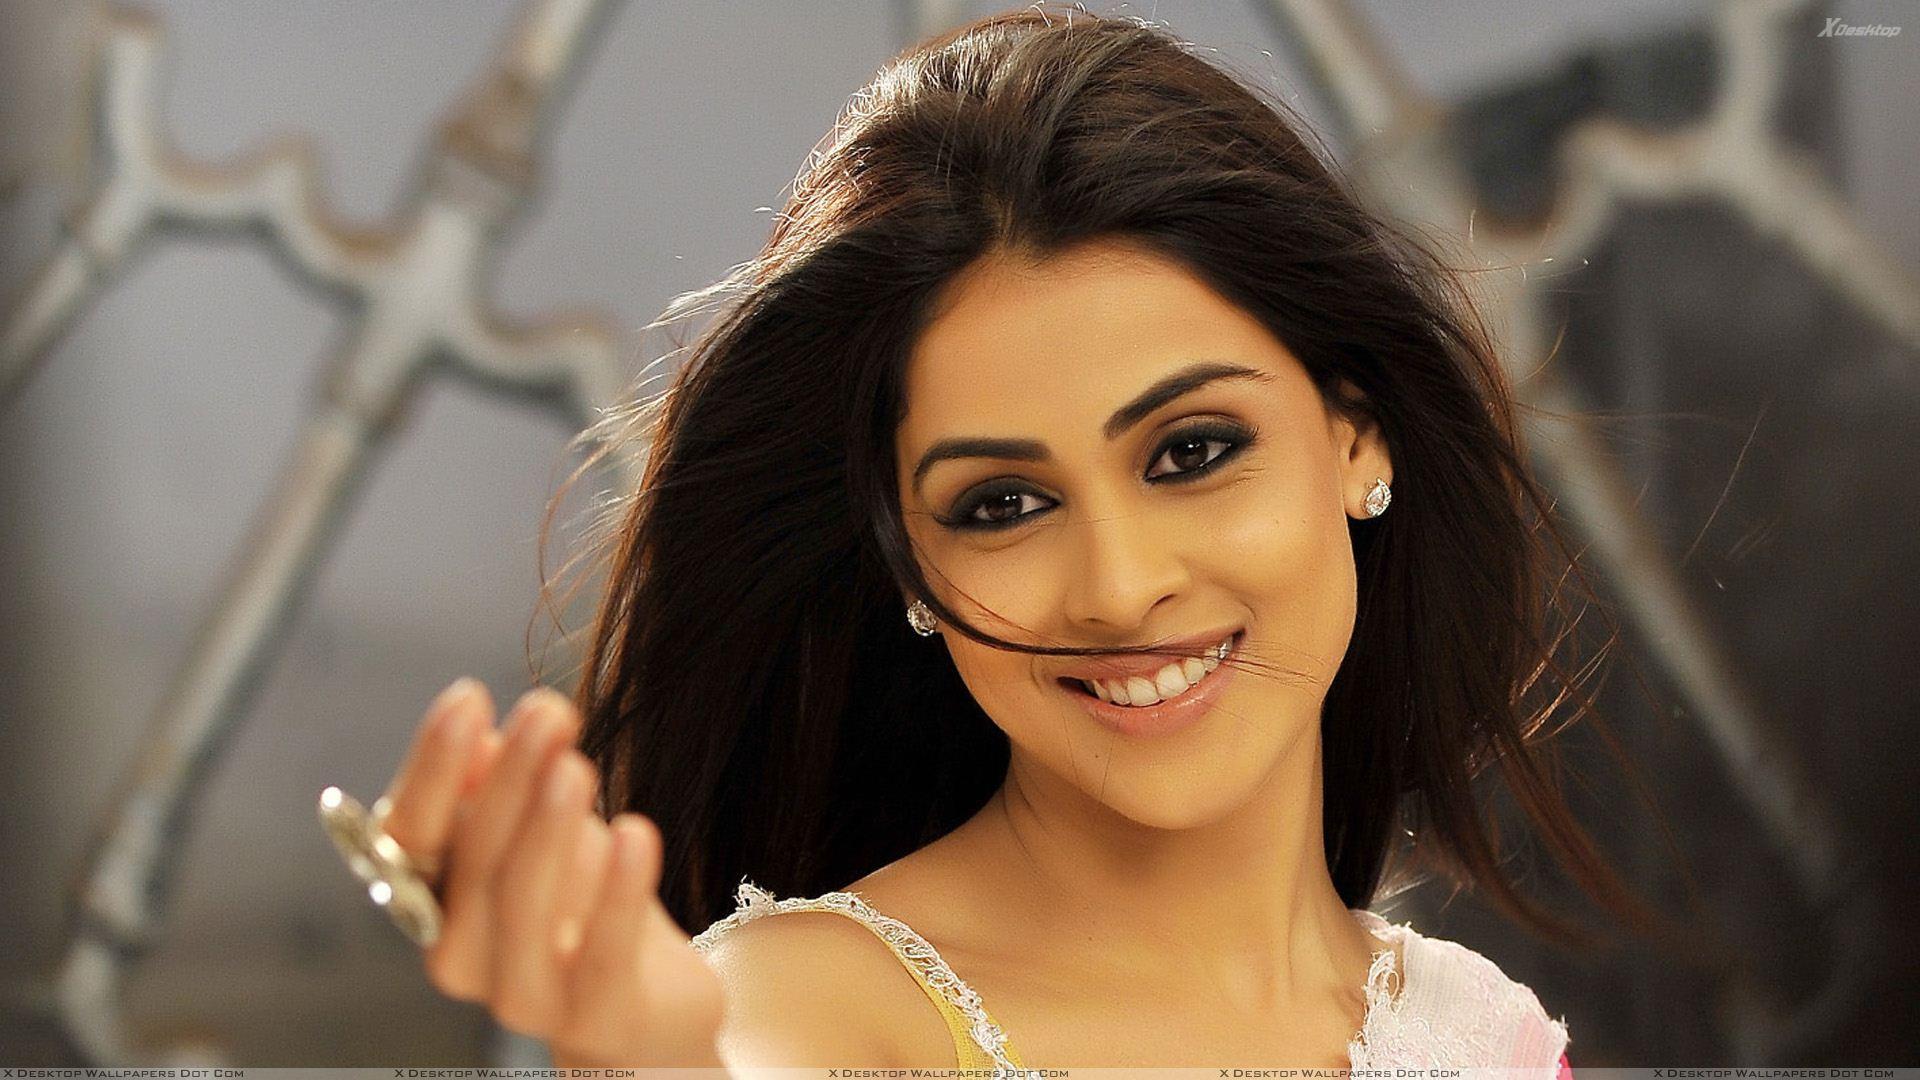 Genelia D'Souza Wallpaper High Resolution and Quality Download